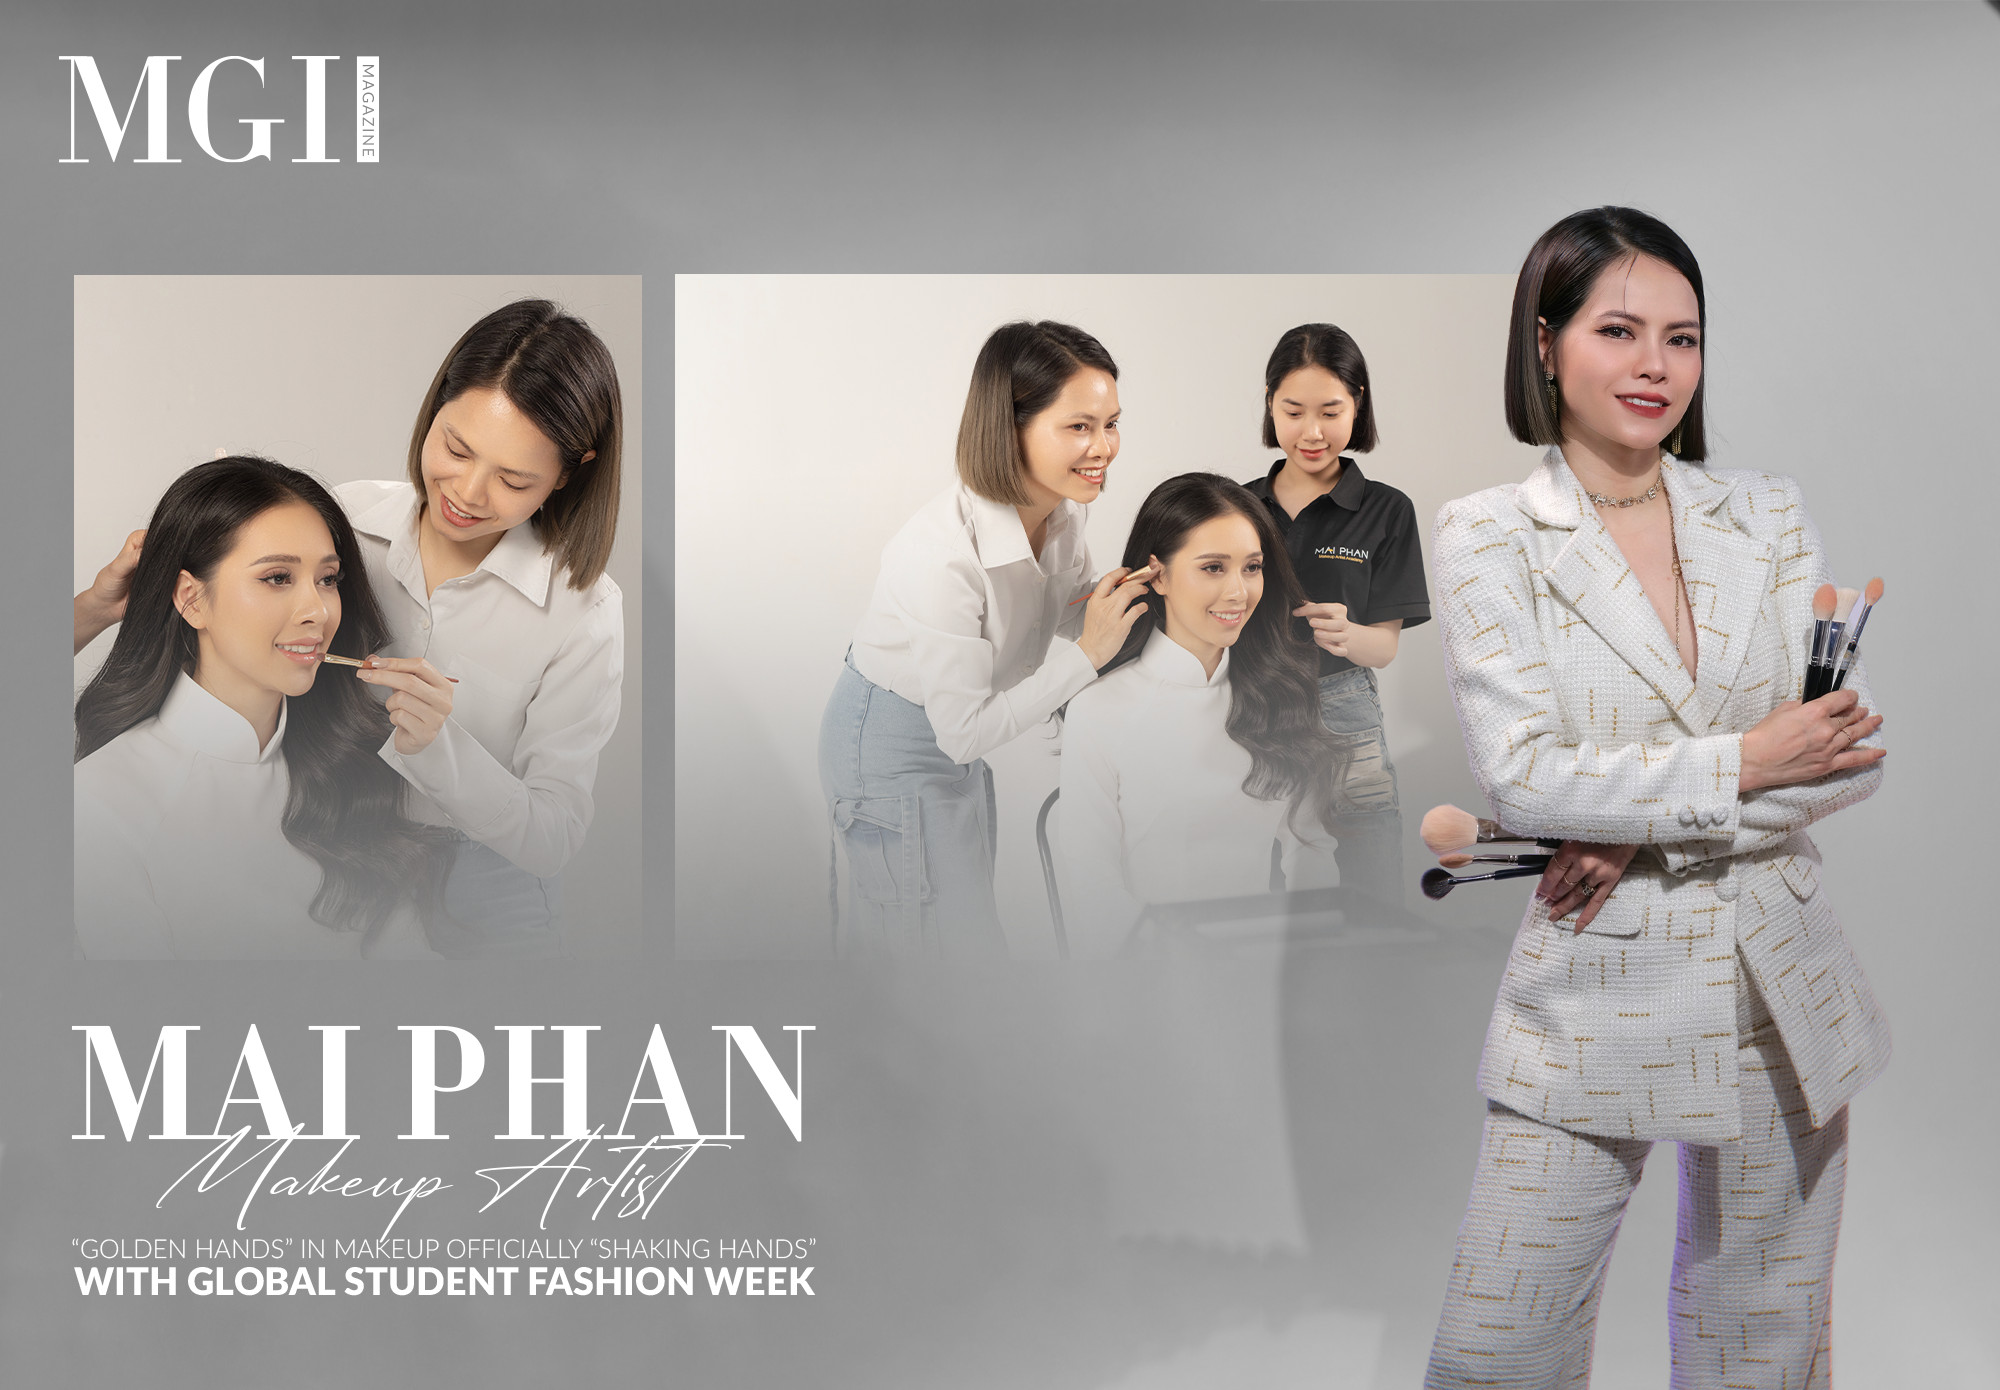 Mai Phan Makeup Artist - “golden hands” in makeup officially “shaking hands” with Global Student Fashion Week